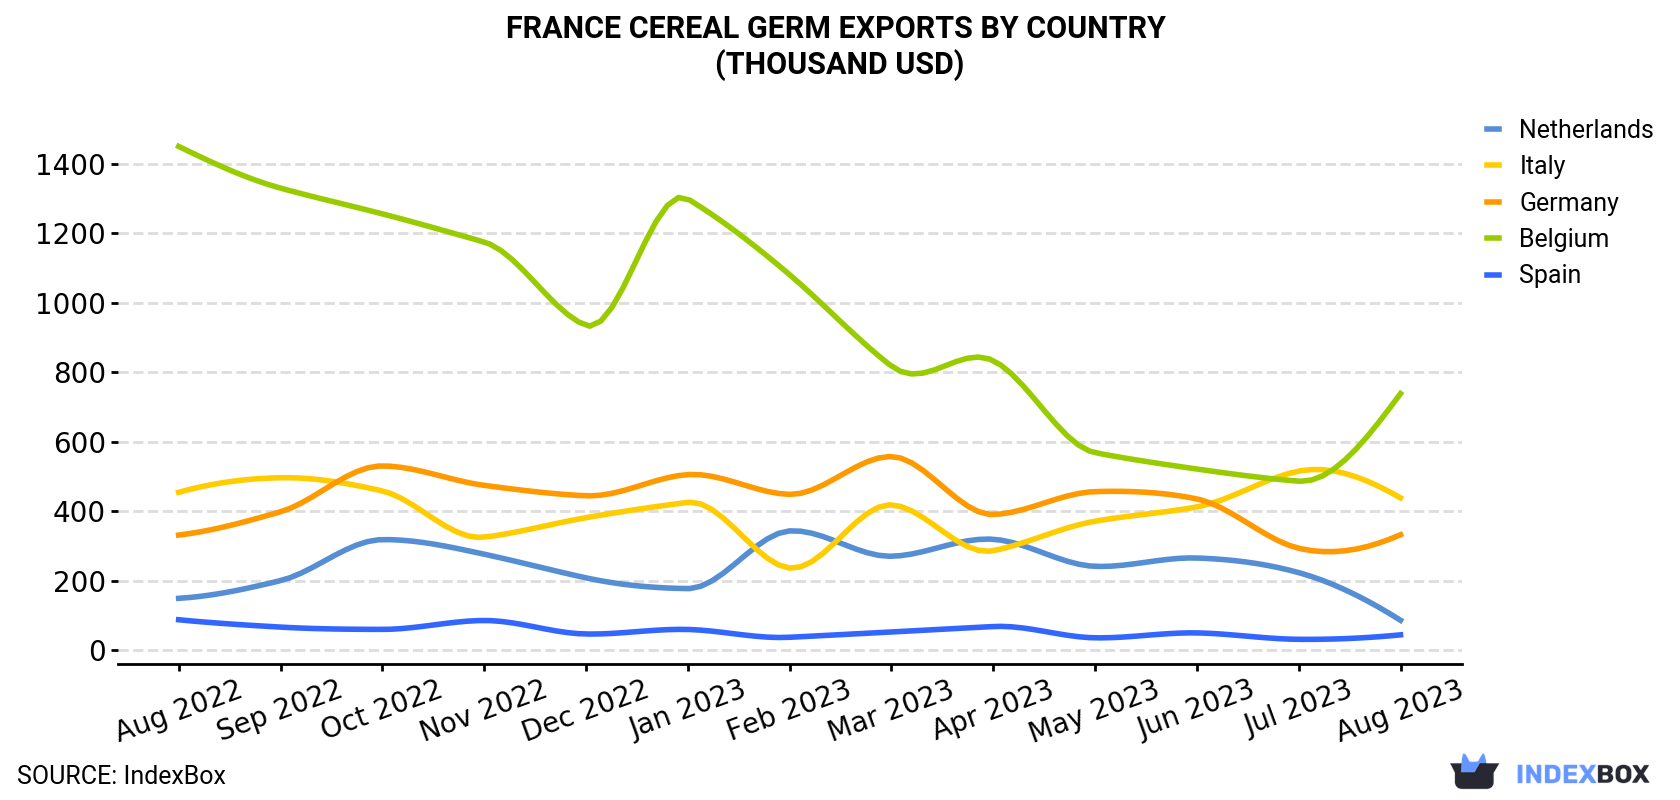 France Cereal Germ Exports By Country (Thousand USD)